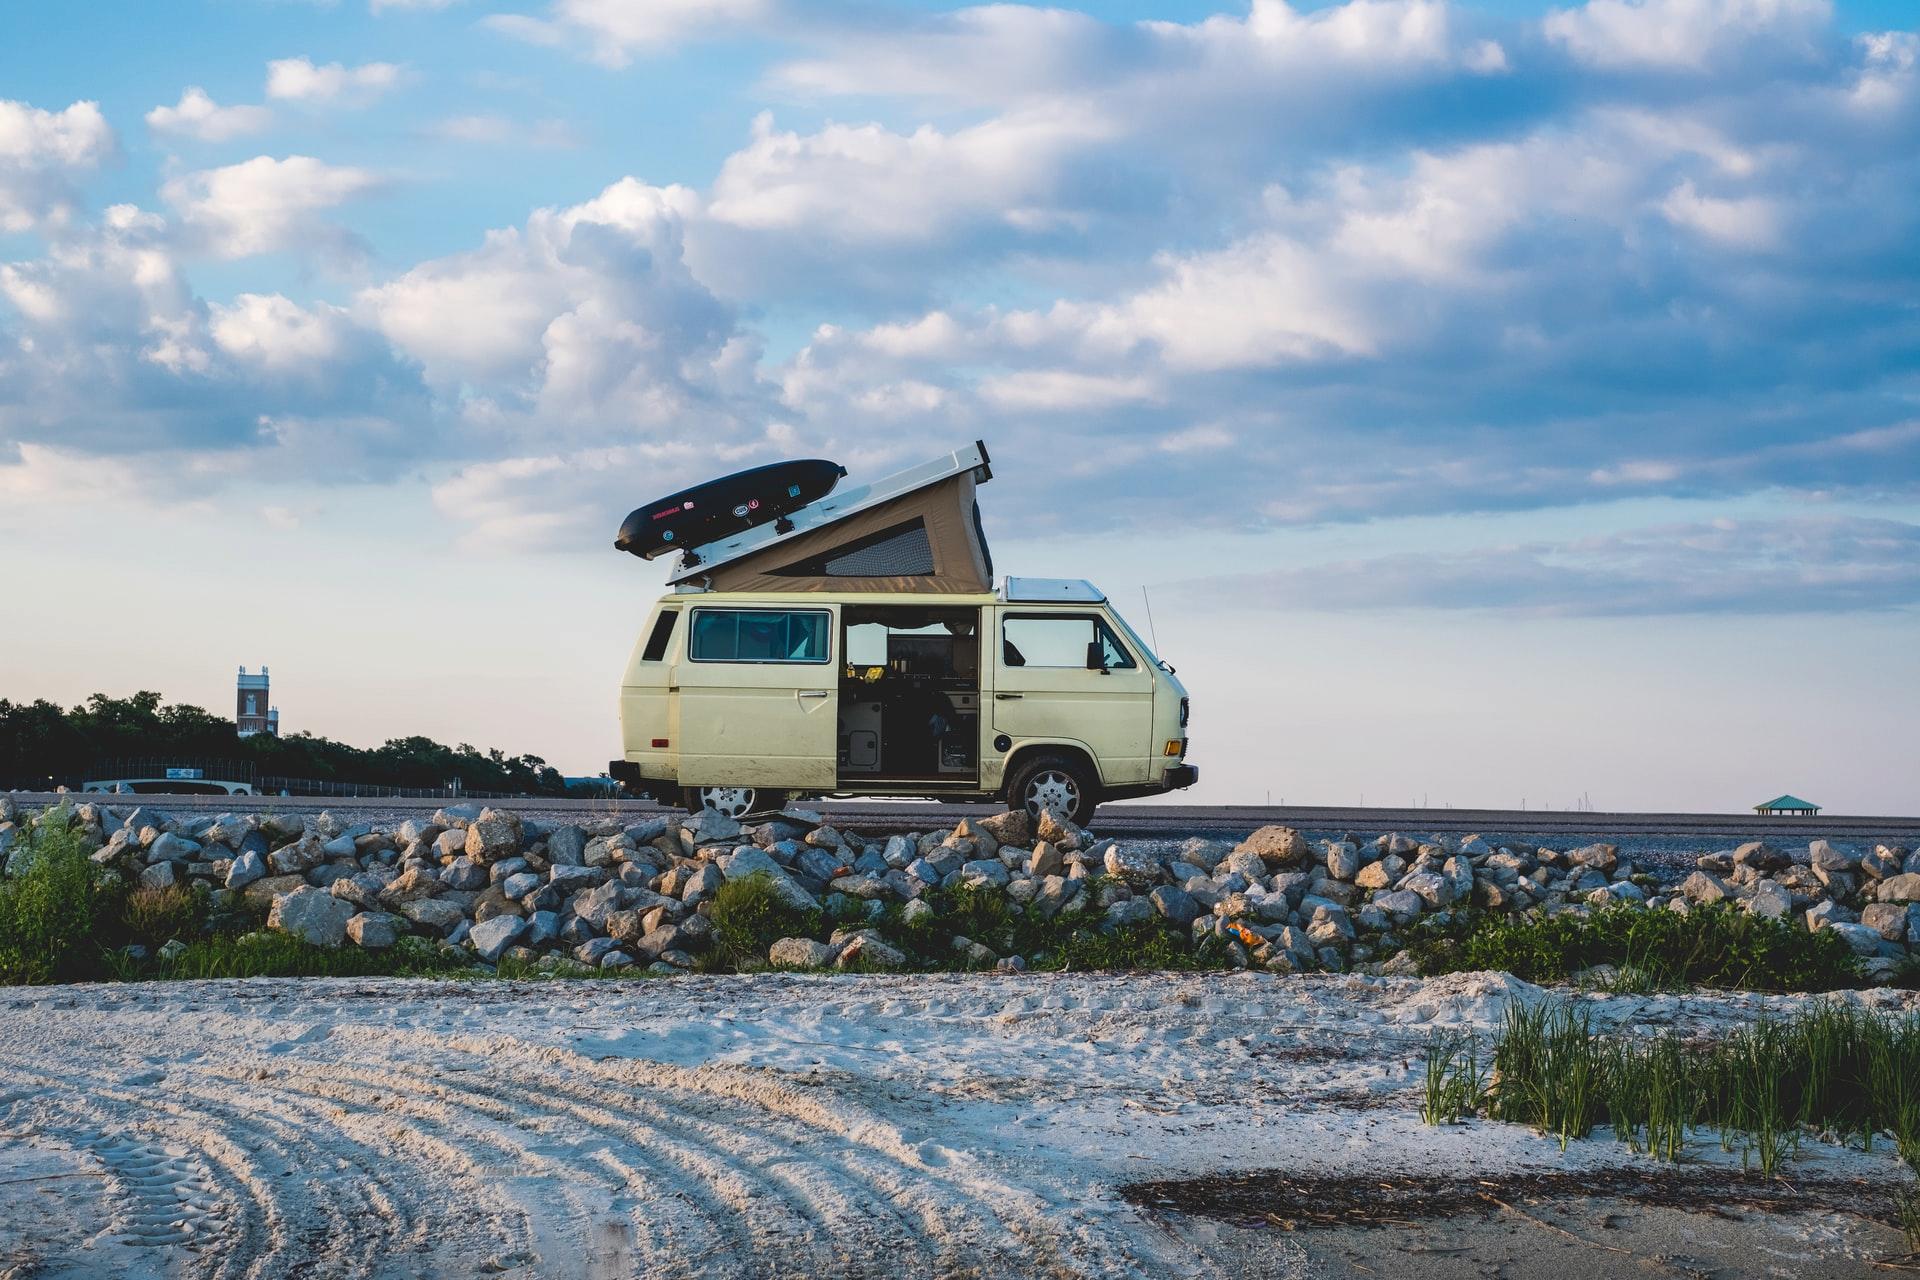 Is Checking Out The Campervan Stock Really Needed?